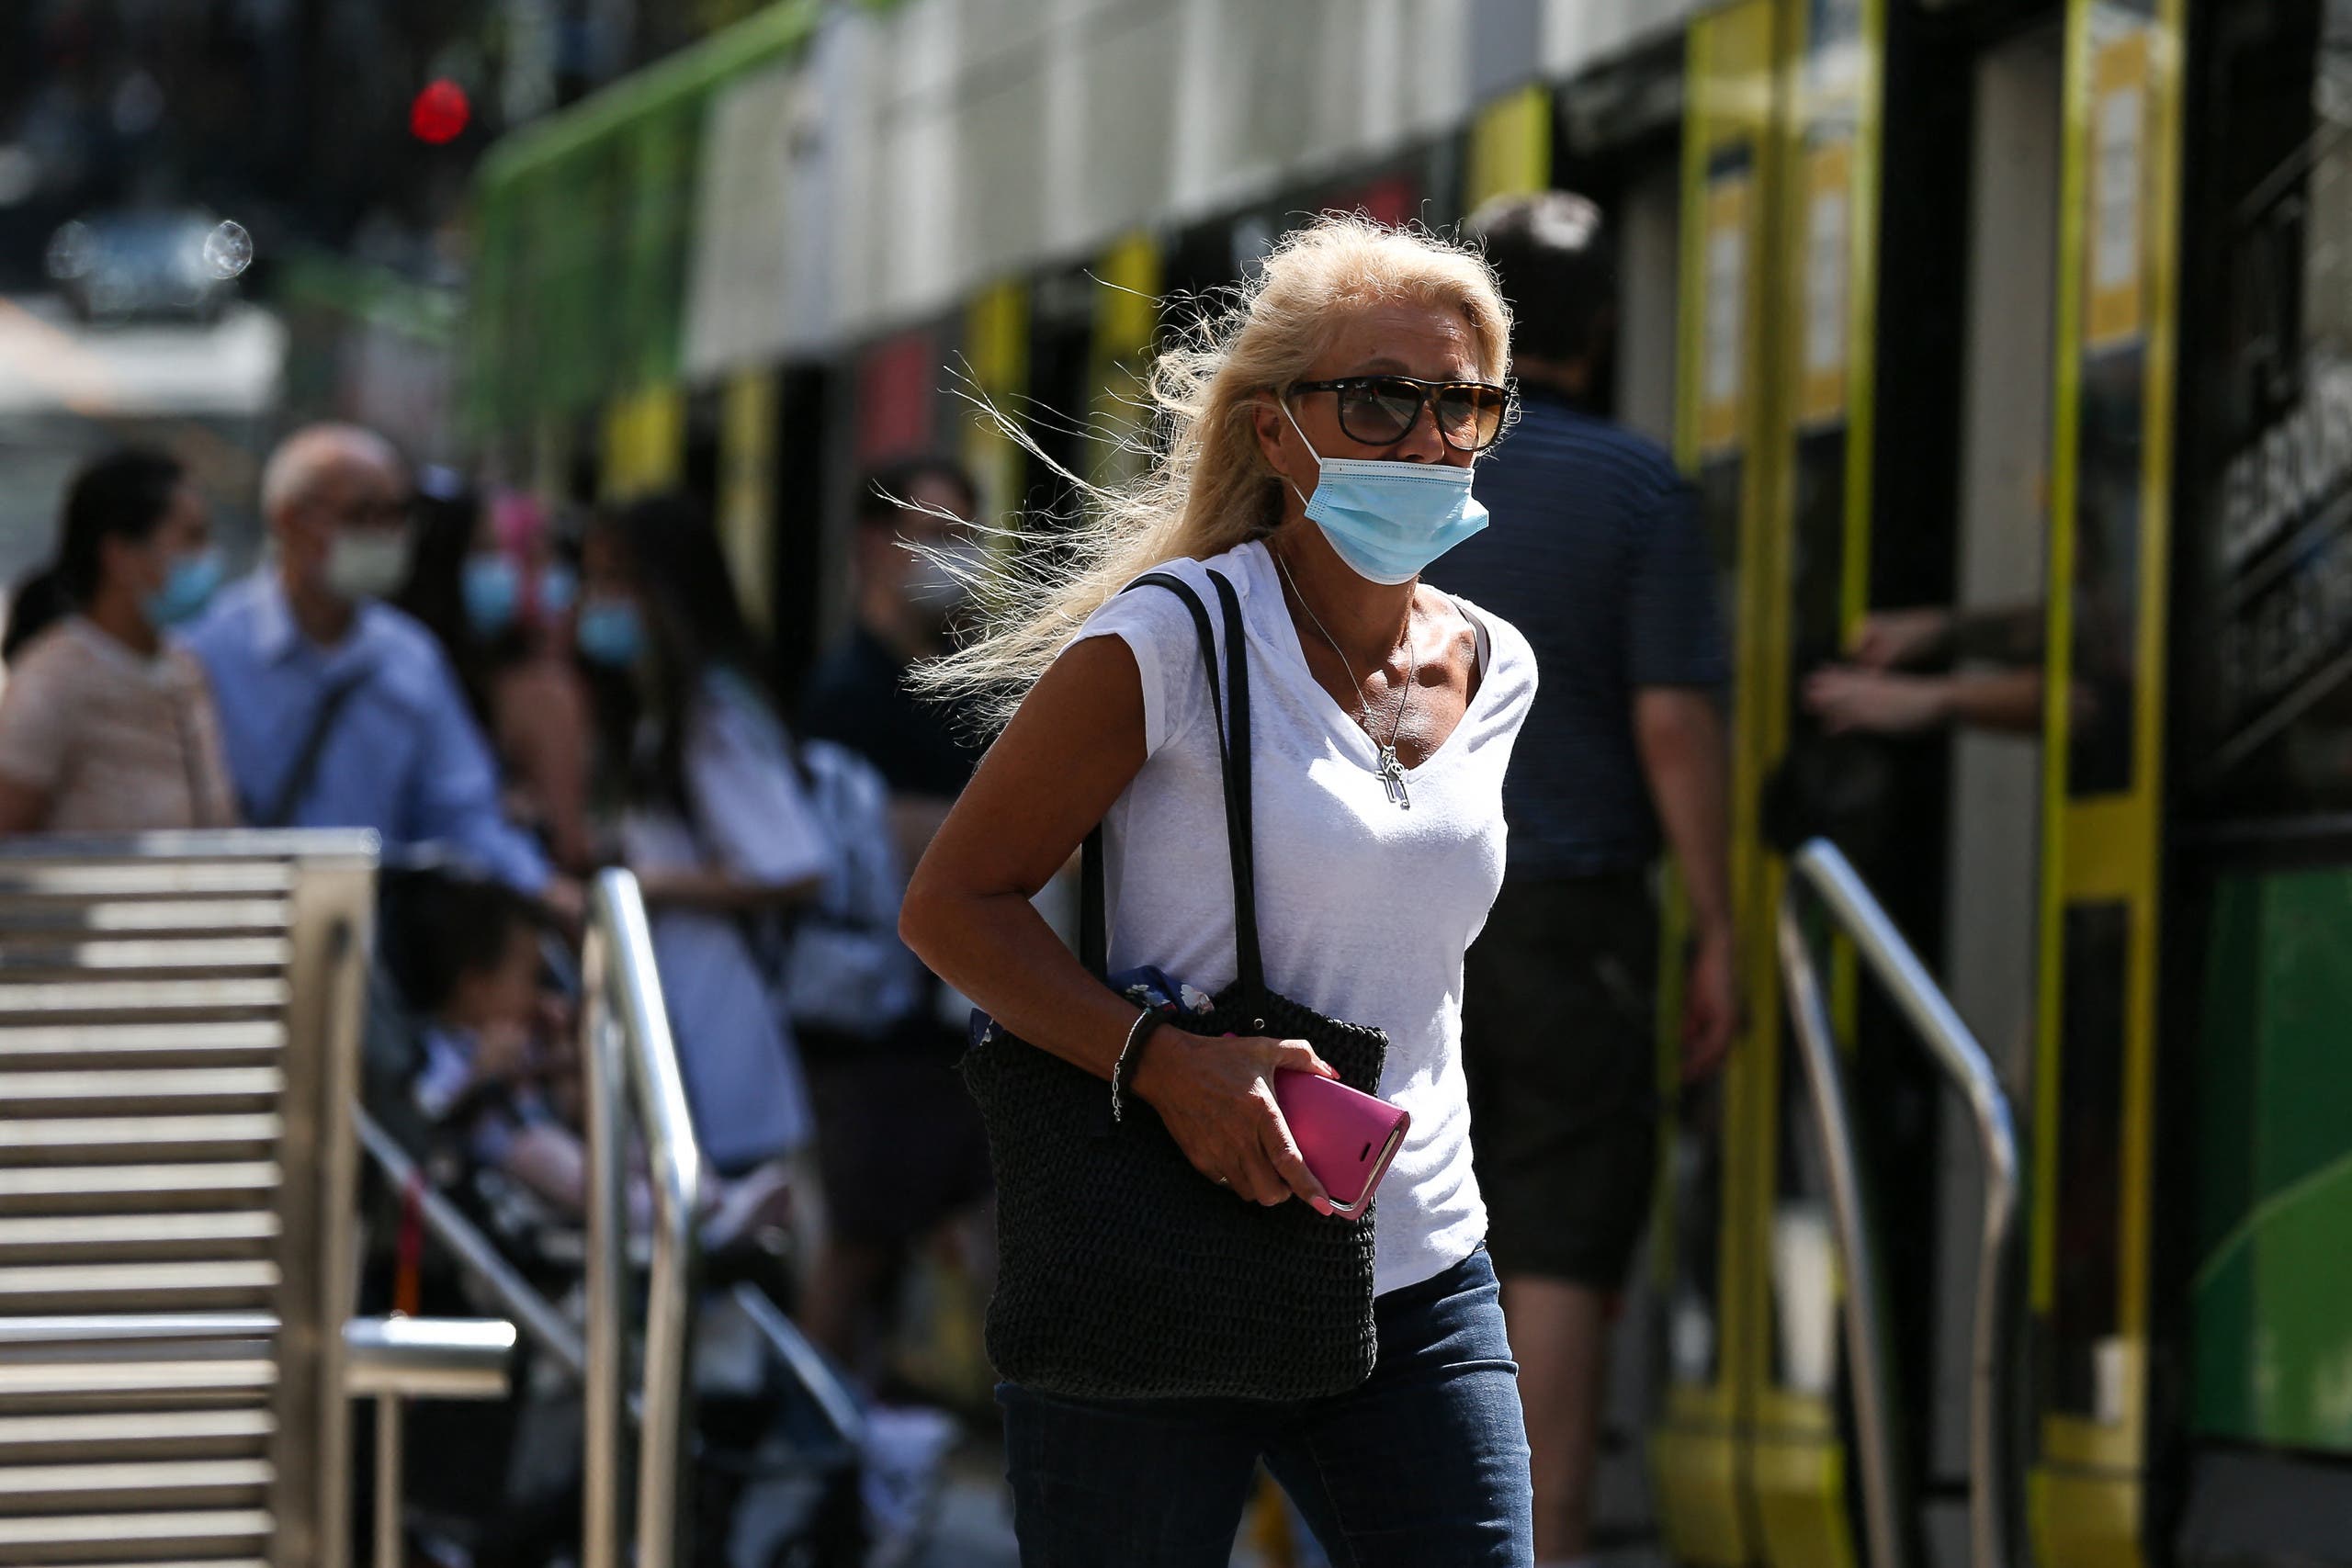 A woman wearing a face mask walks on a street in Melbourne on February 12, 2021, after authorities ordered a five-day state-wide lockdown starting at midnight local time to stamp out a new coronavirus outbreak. (AFP)